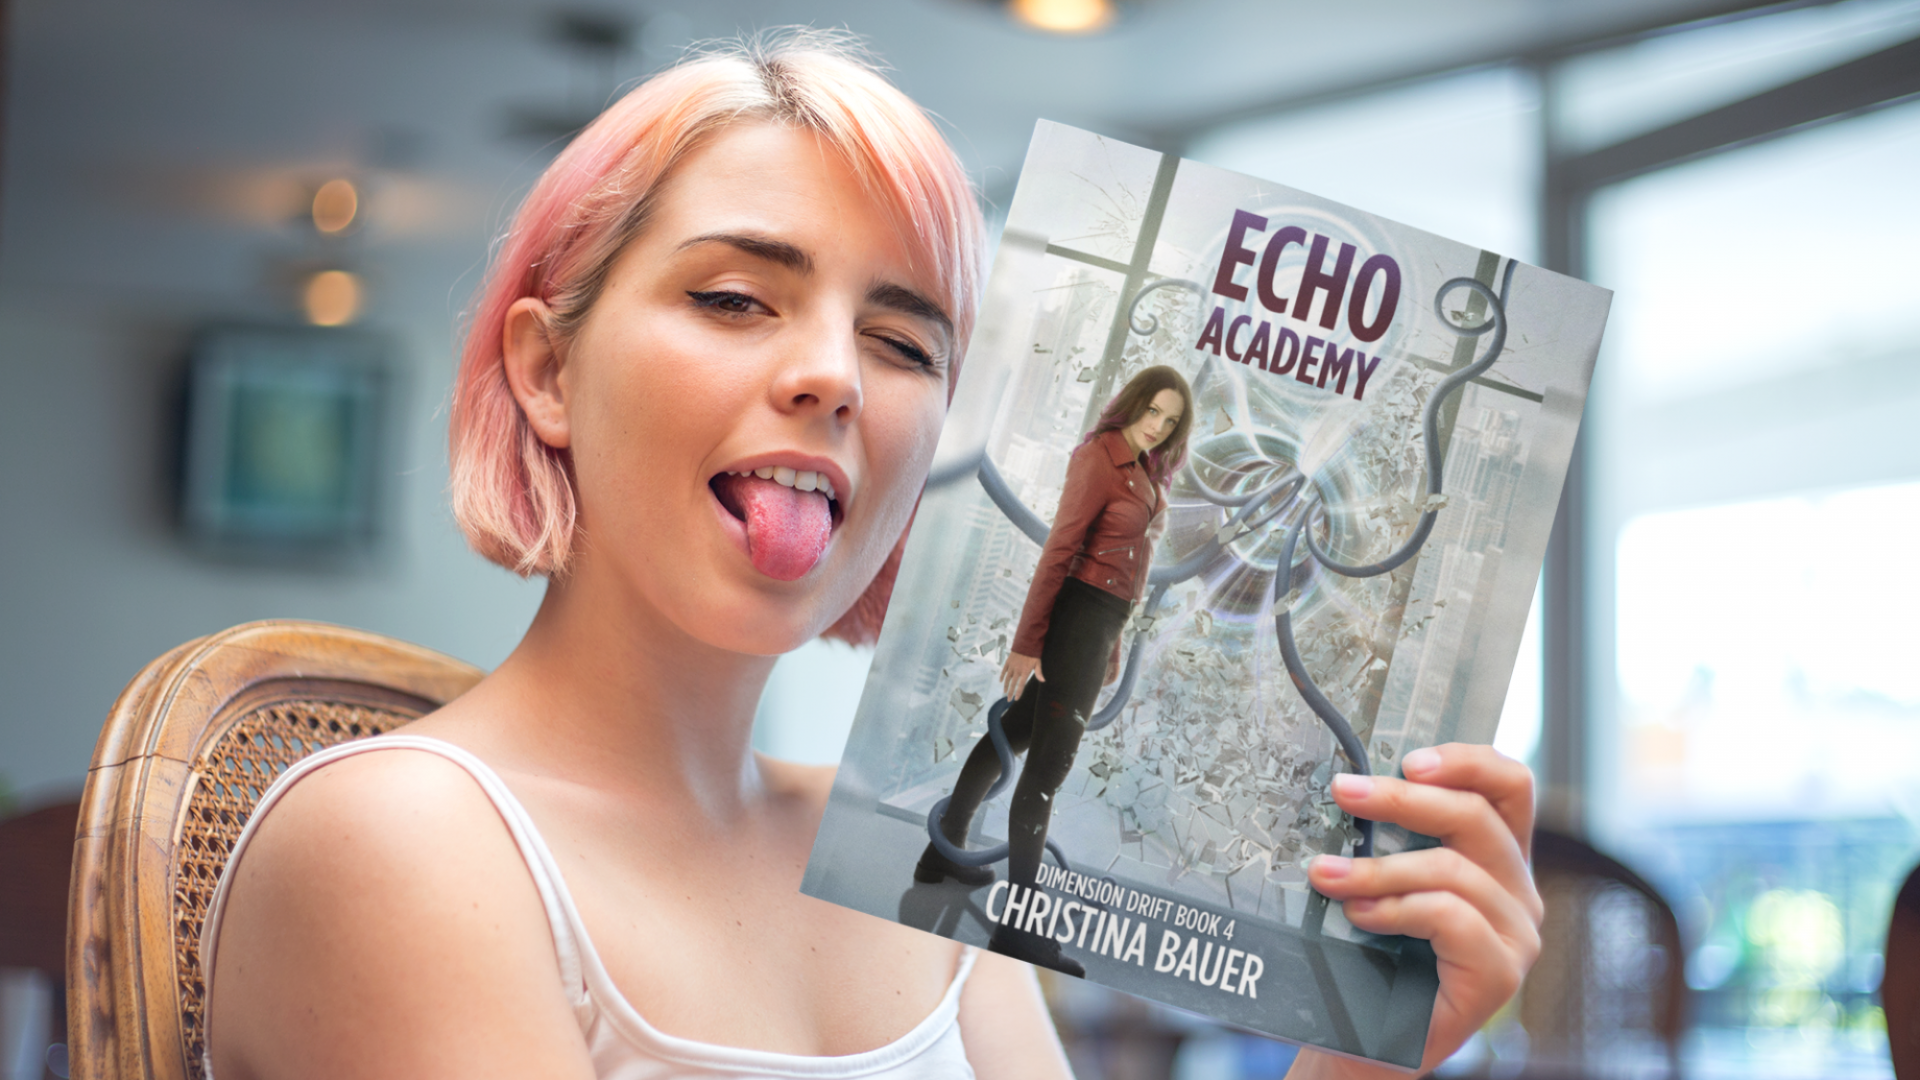 ECHO ACADEMY - Early Reviews Are Here!